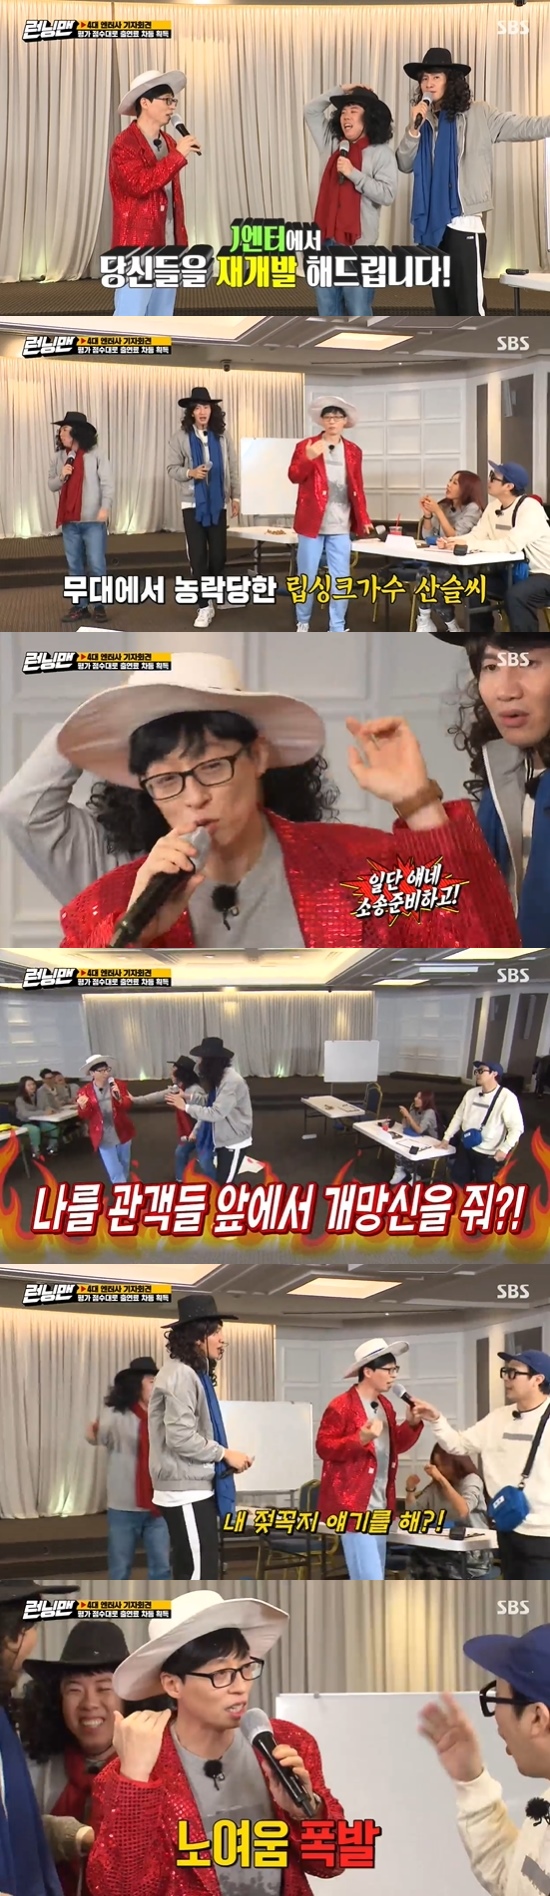 Yoo Jae-Suk, who heard the Diss song of Running Man Lee Kwang-soo and Yang Se-chan, laughed when he told him to prepare for the lawsuit.On the 28th SBS Good Sunday - Running Man, Haha, Lee Kwang-soo, Ji Suk-jin and Jeon So-min appeared as representatives of the agency, and the war race of stars was unfolded.On that day, the cocoa of Jeon So-min, J of Lee Kwang-soo, JBR (Janbari) of Ji Suk-jin, and DK (dirty mustache) entertainment of Haha appeared in Running Man.Representatives had to negotiate a profit distribution with celebrities to succeed in the contract. Representatives were paid 300,000 won for the opening ceremony.Lee Kwang-soo said: The first Hyun-Taw time I went home and its time for this toy money to come out of my pocket, what Id like to go through all day.In the first contract, Jeon So-min was Wooyoung, Lee Kwang-soo was Yang Se-chan, Ji Suk-jin was Kim Jong Kook and Song Ji-hyo, and Haha was successful with Yoo Jae-Suk and Jessie.Lee Kwang-soo, in particular, even cut the back hair directly with scissors when Yang Se-chan demanded to sign if he cut the back.Then the four major companies regrouped: Chang Woo Young said, Is there a contract 9:1? but Jessie said, What do you do then?I want to be an entertainer. Chang Woo Young said, I knew after signing the contract. I had a dream.Next up was the turn of the Kwangsu agency: Lee Kwang-soo, who prepared the heritage song, and Yang Se-chan tried to invite Yoo Jae-Suk.Yoo Jae-Suk negotiated the price after carefully checking whether to shoot live, AR or video.Ji Suk-jin tried to open a niche, saying he could sing a heritage song, but Lee Kwang-soo, Yang Se-chan just invited Yoo Jae-Suk.Yoo Jae-Suk has started lip-shanking the song Redevelopment of Love, transforming into a miscarriage.However, Yang Se-chan, Lee Kwang-soo, dissed the appearance of Yoo Jae-Suk in the middle of the song, and Yoo Jae-Suk stopped the explosion and song when he even talked about nipples following the fierceness.Yoo Jae-Suk laughed when he told him to prepare for the lawsuit, saying, Give me a disgrace?Photo = SBS Broadcasting Screen